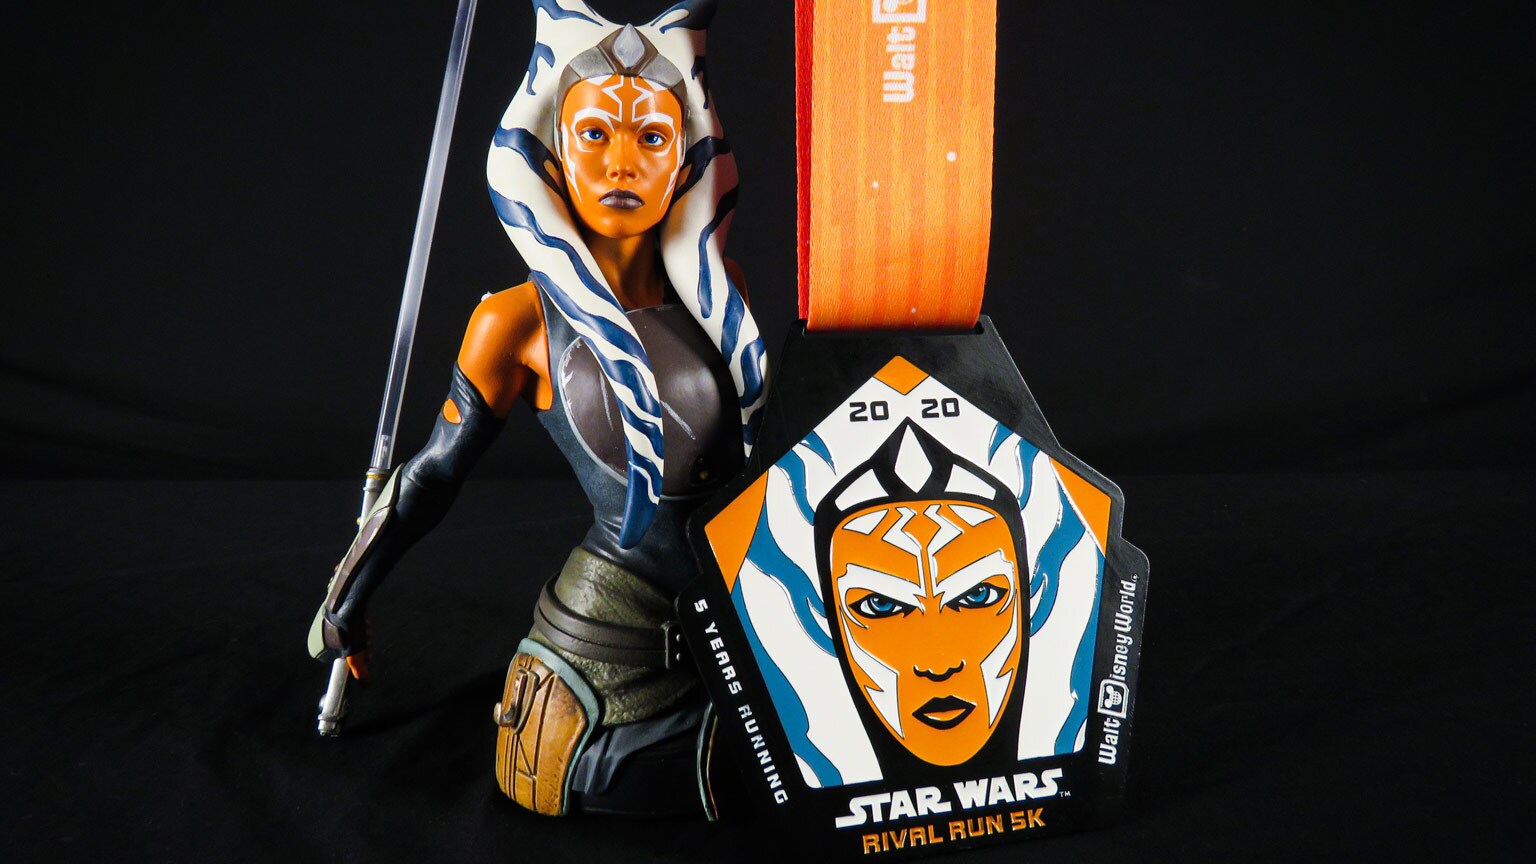 Ahsoka Tano, Yoda, and More Icons Star on runDisney's 2020 Star Wars Medals - Exclusive